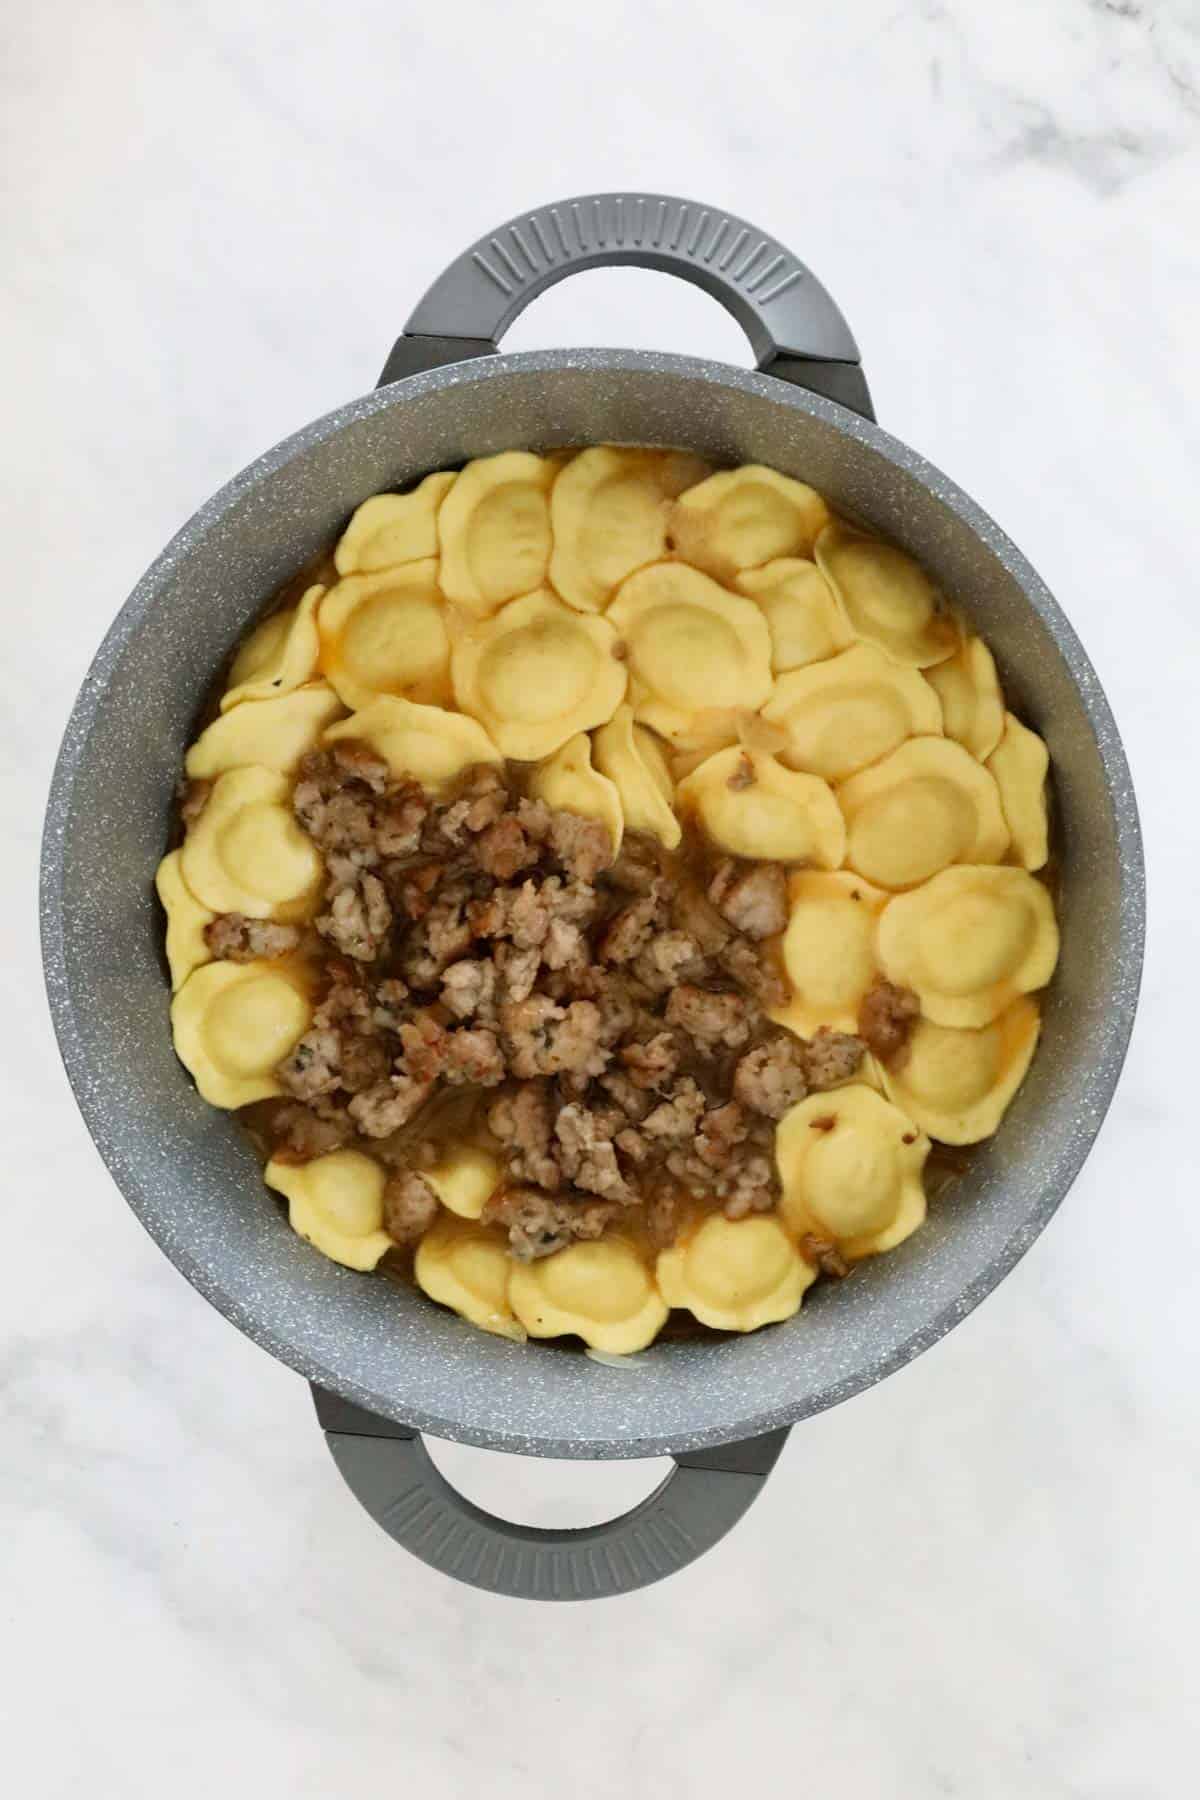 The cooked sausage and tortellini added to the pan.